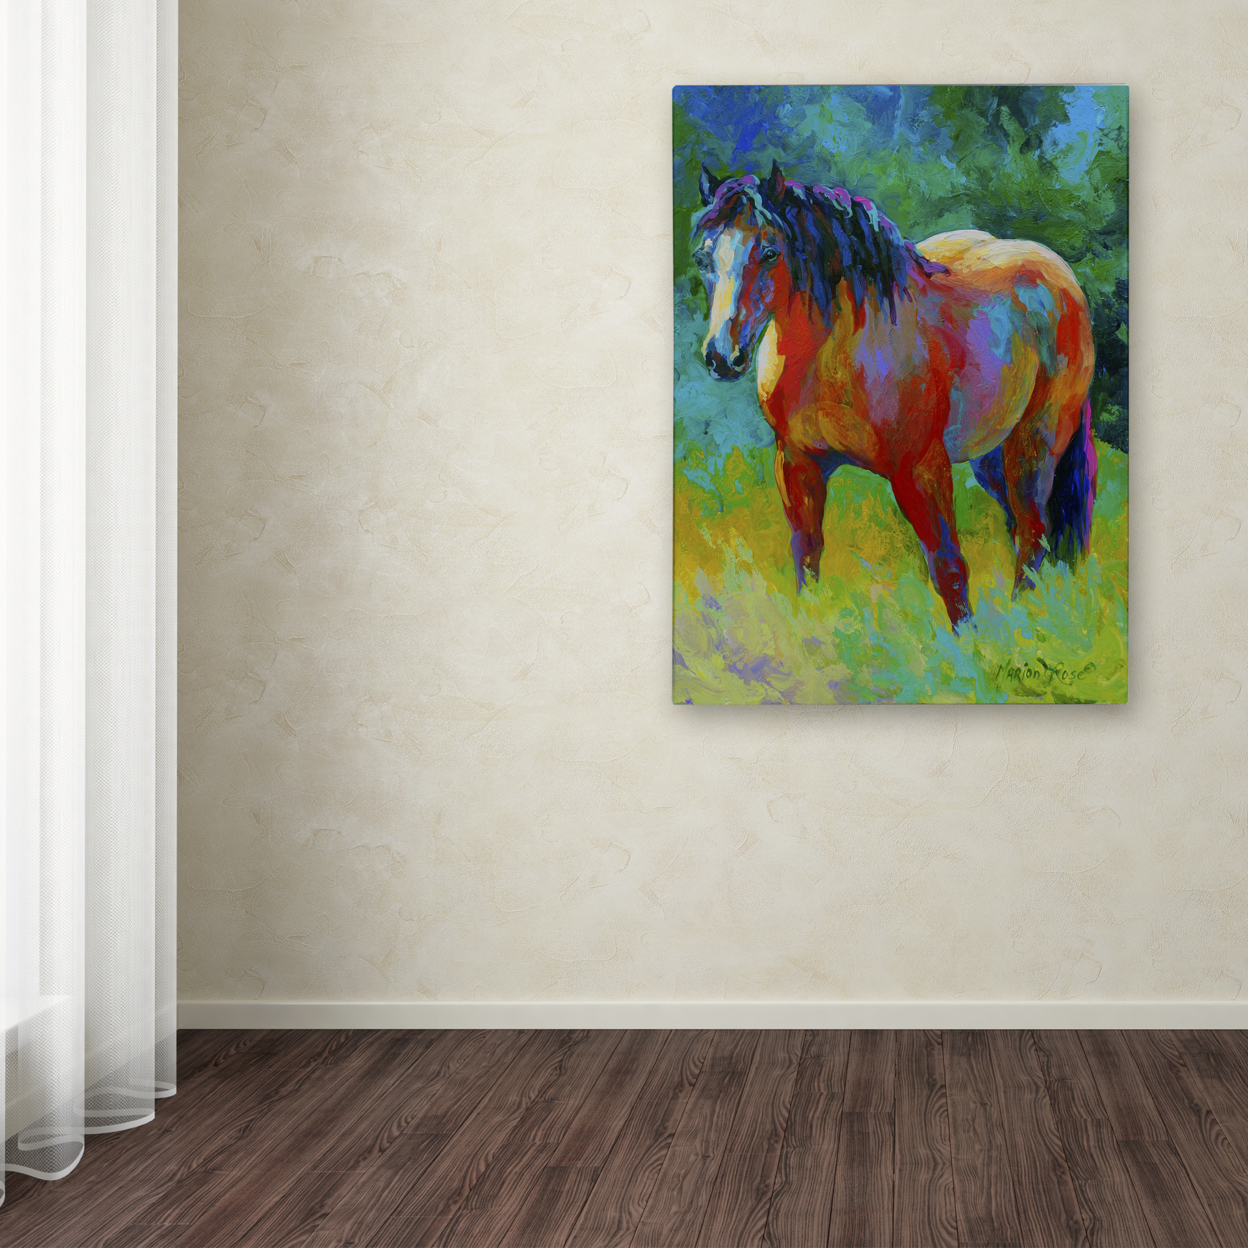 Marion Rose 'Buckskin II' Ready To Hang Canvas Art 35 X 47 Inches Made In USA